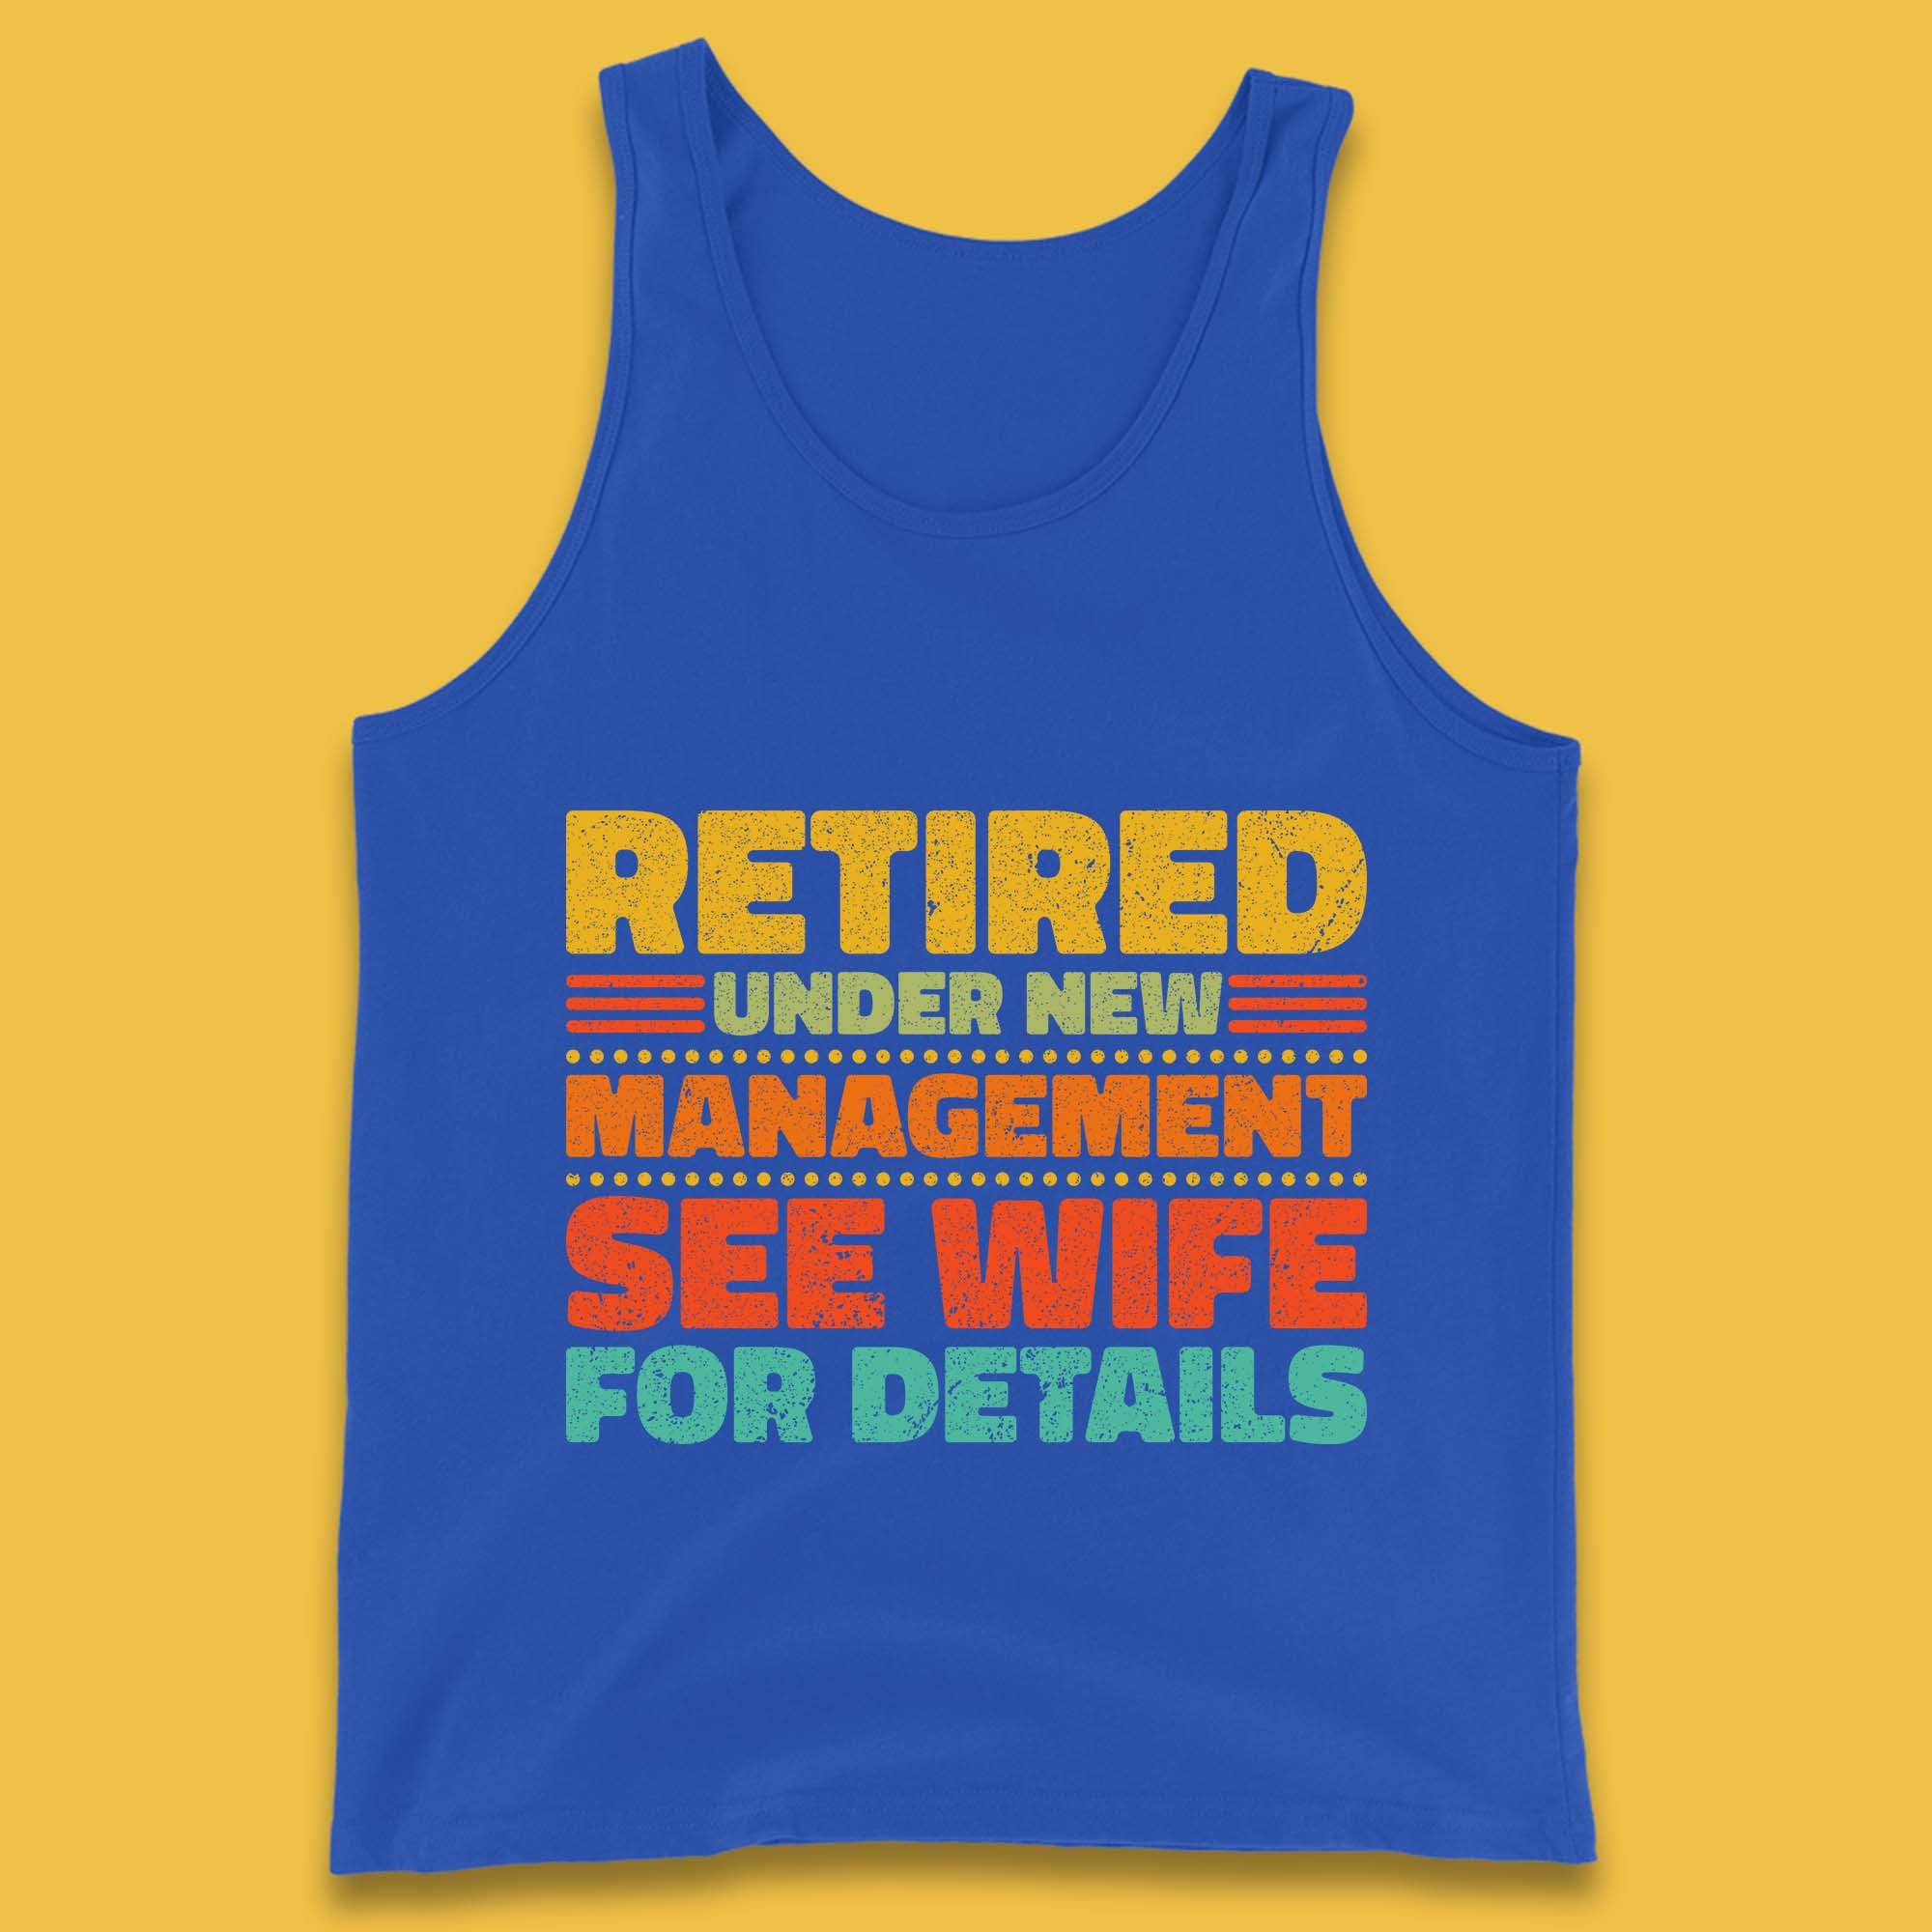 Retired Under New Management See Wife For Details Vintage Retirement Life Tank Top